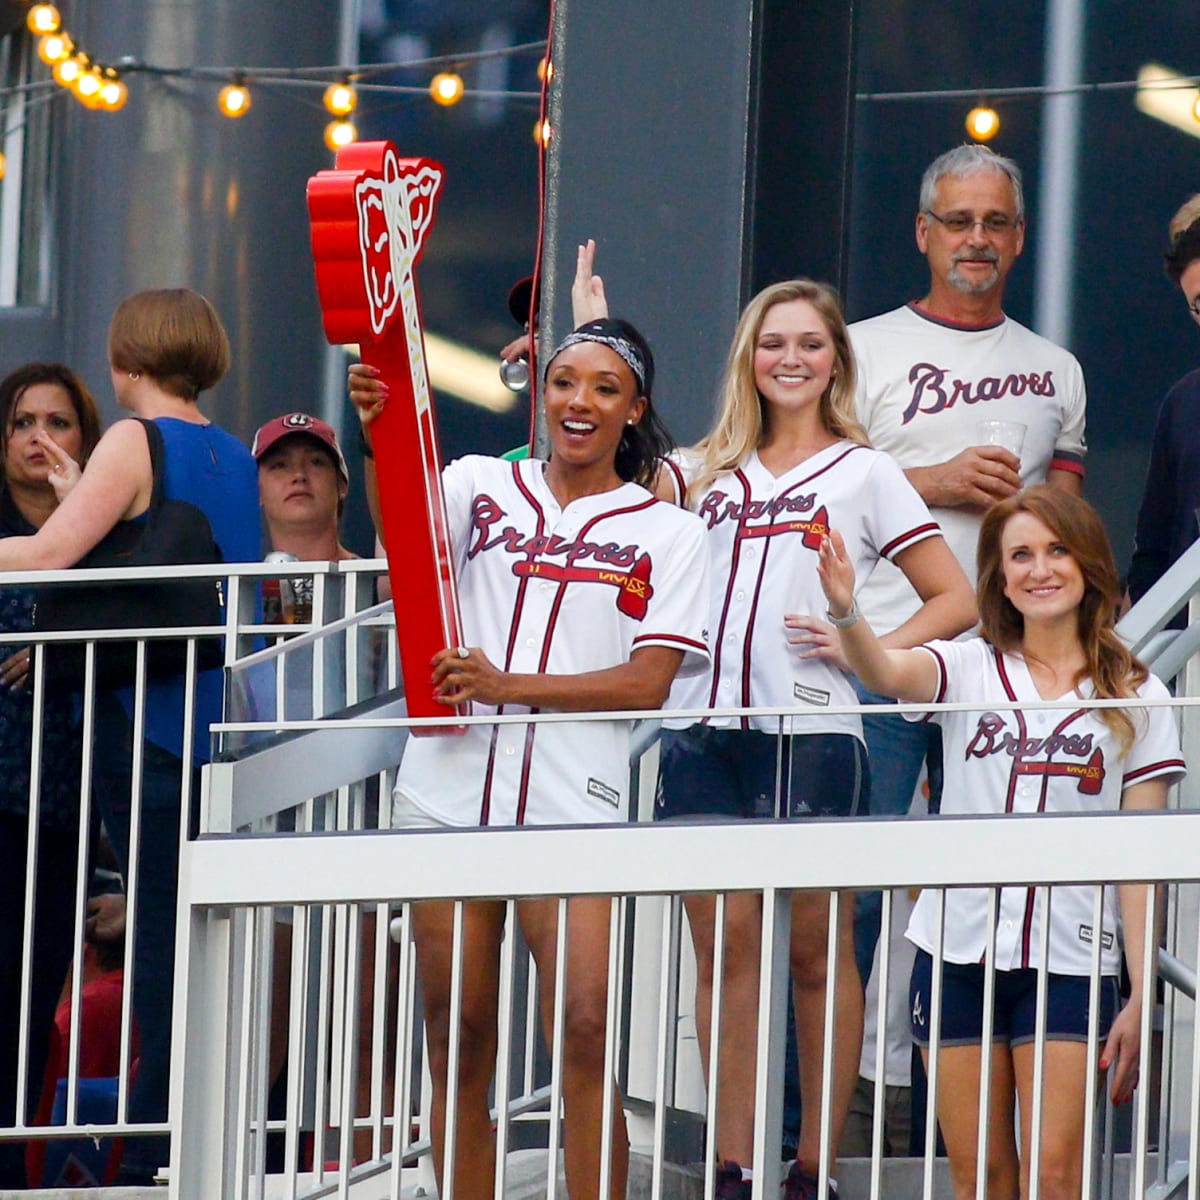 Braves tomahawk chop: No foam tomahawks for fans, limit on chop by Braves  for Game 5 of NLDS